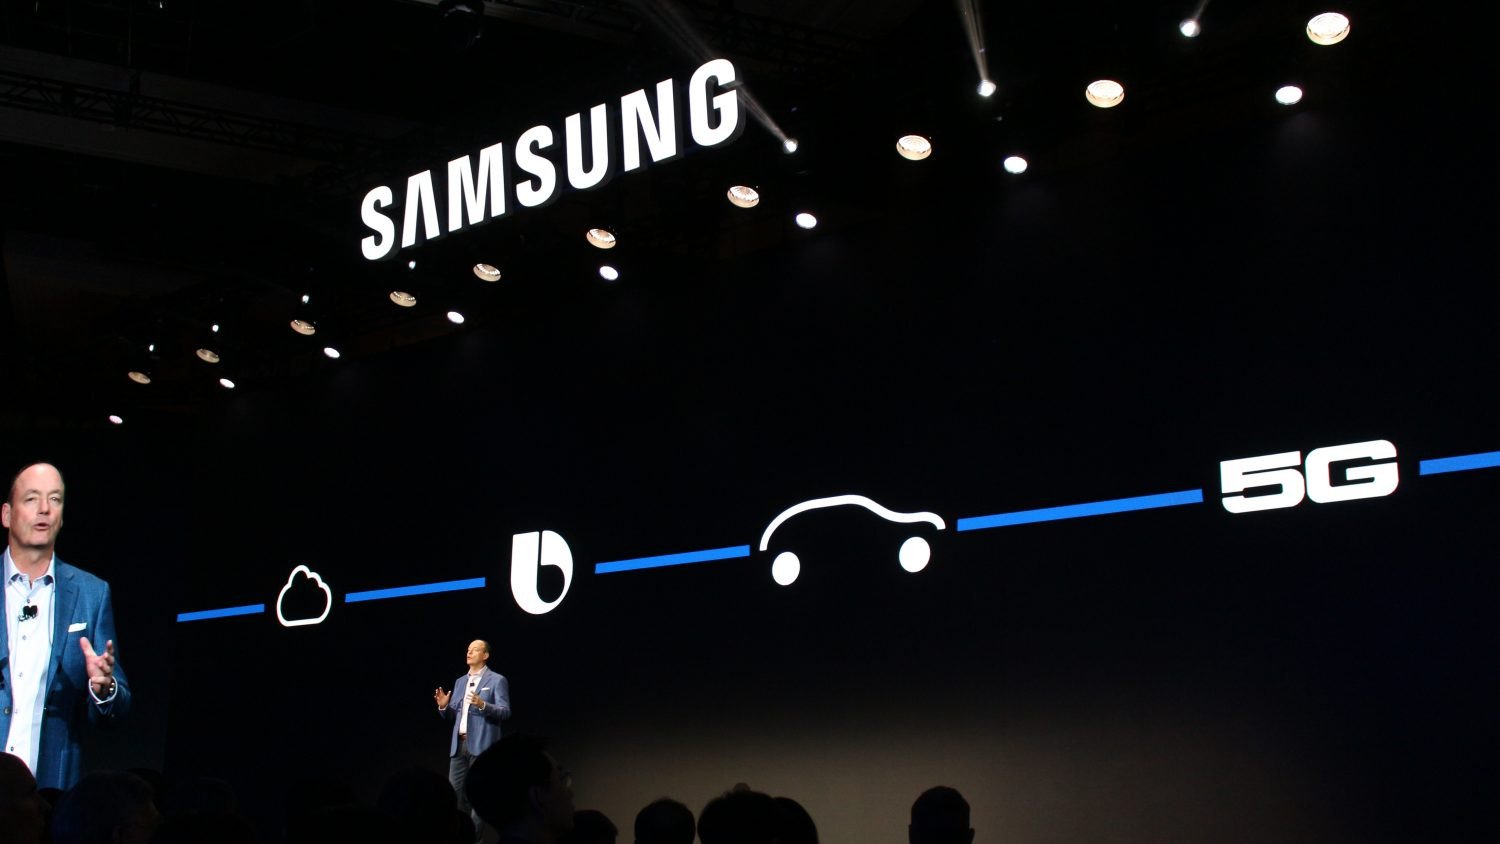 5G-flagship of Samsung is one of the three